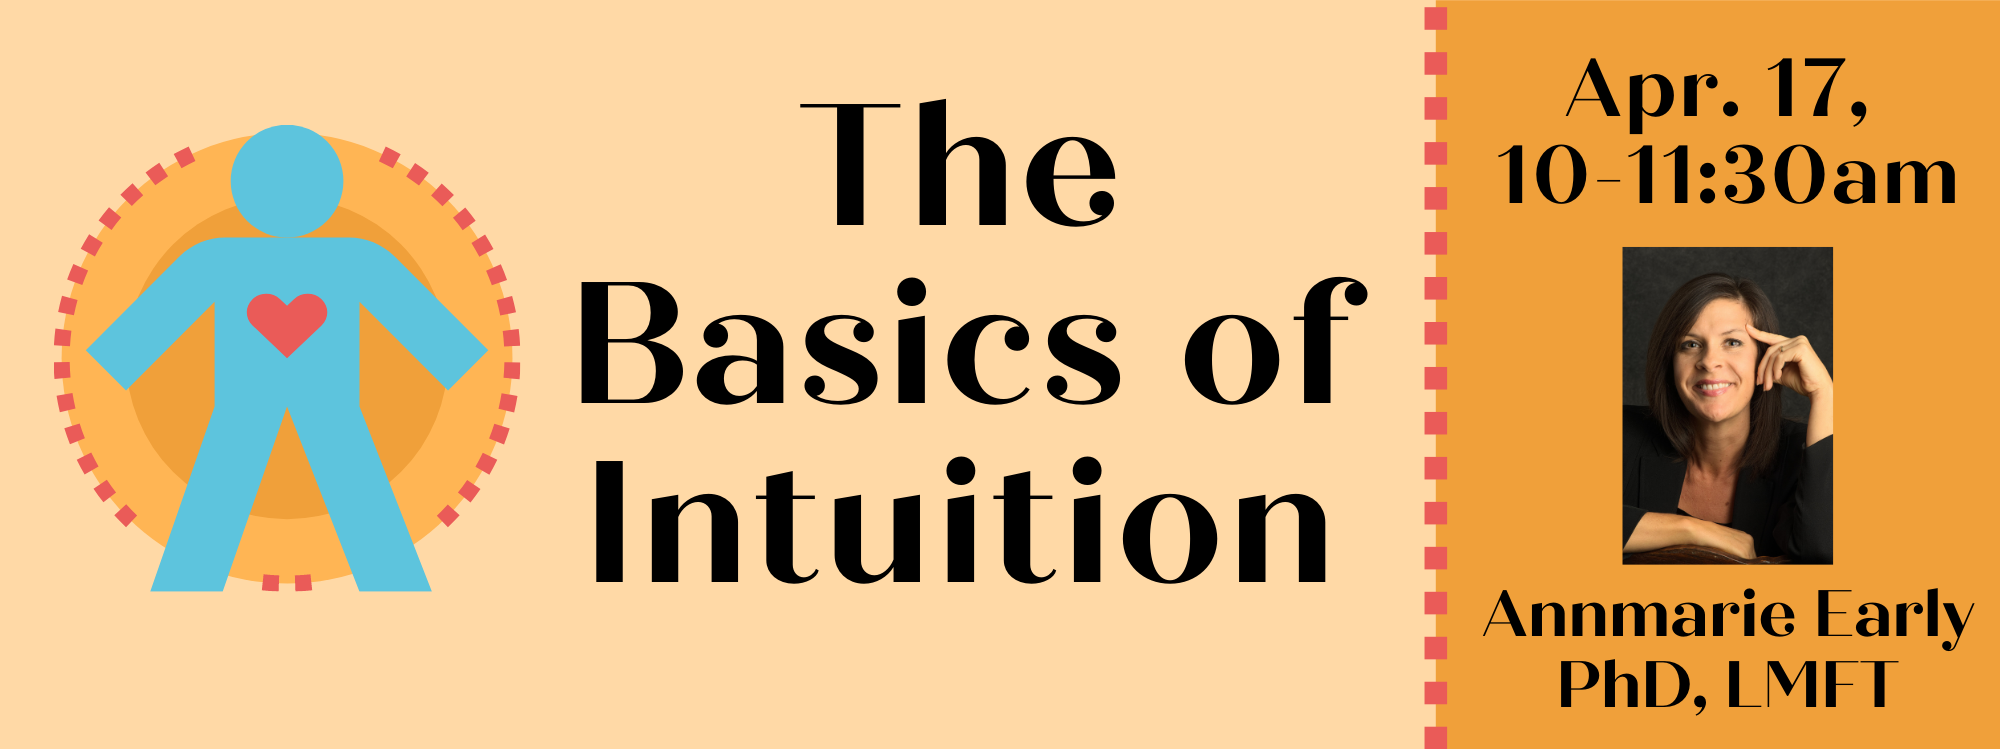 The Basics of Intuition